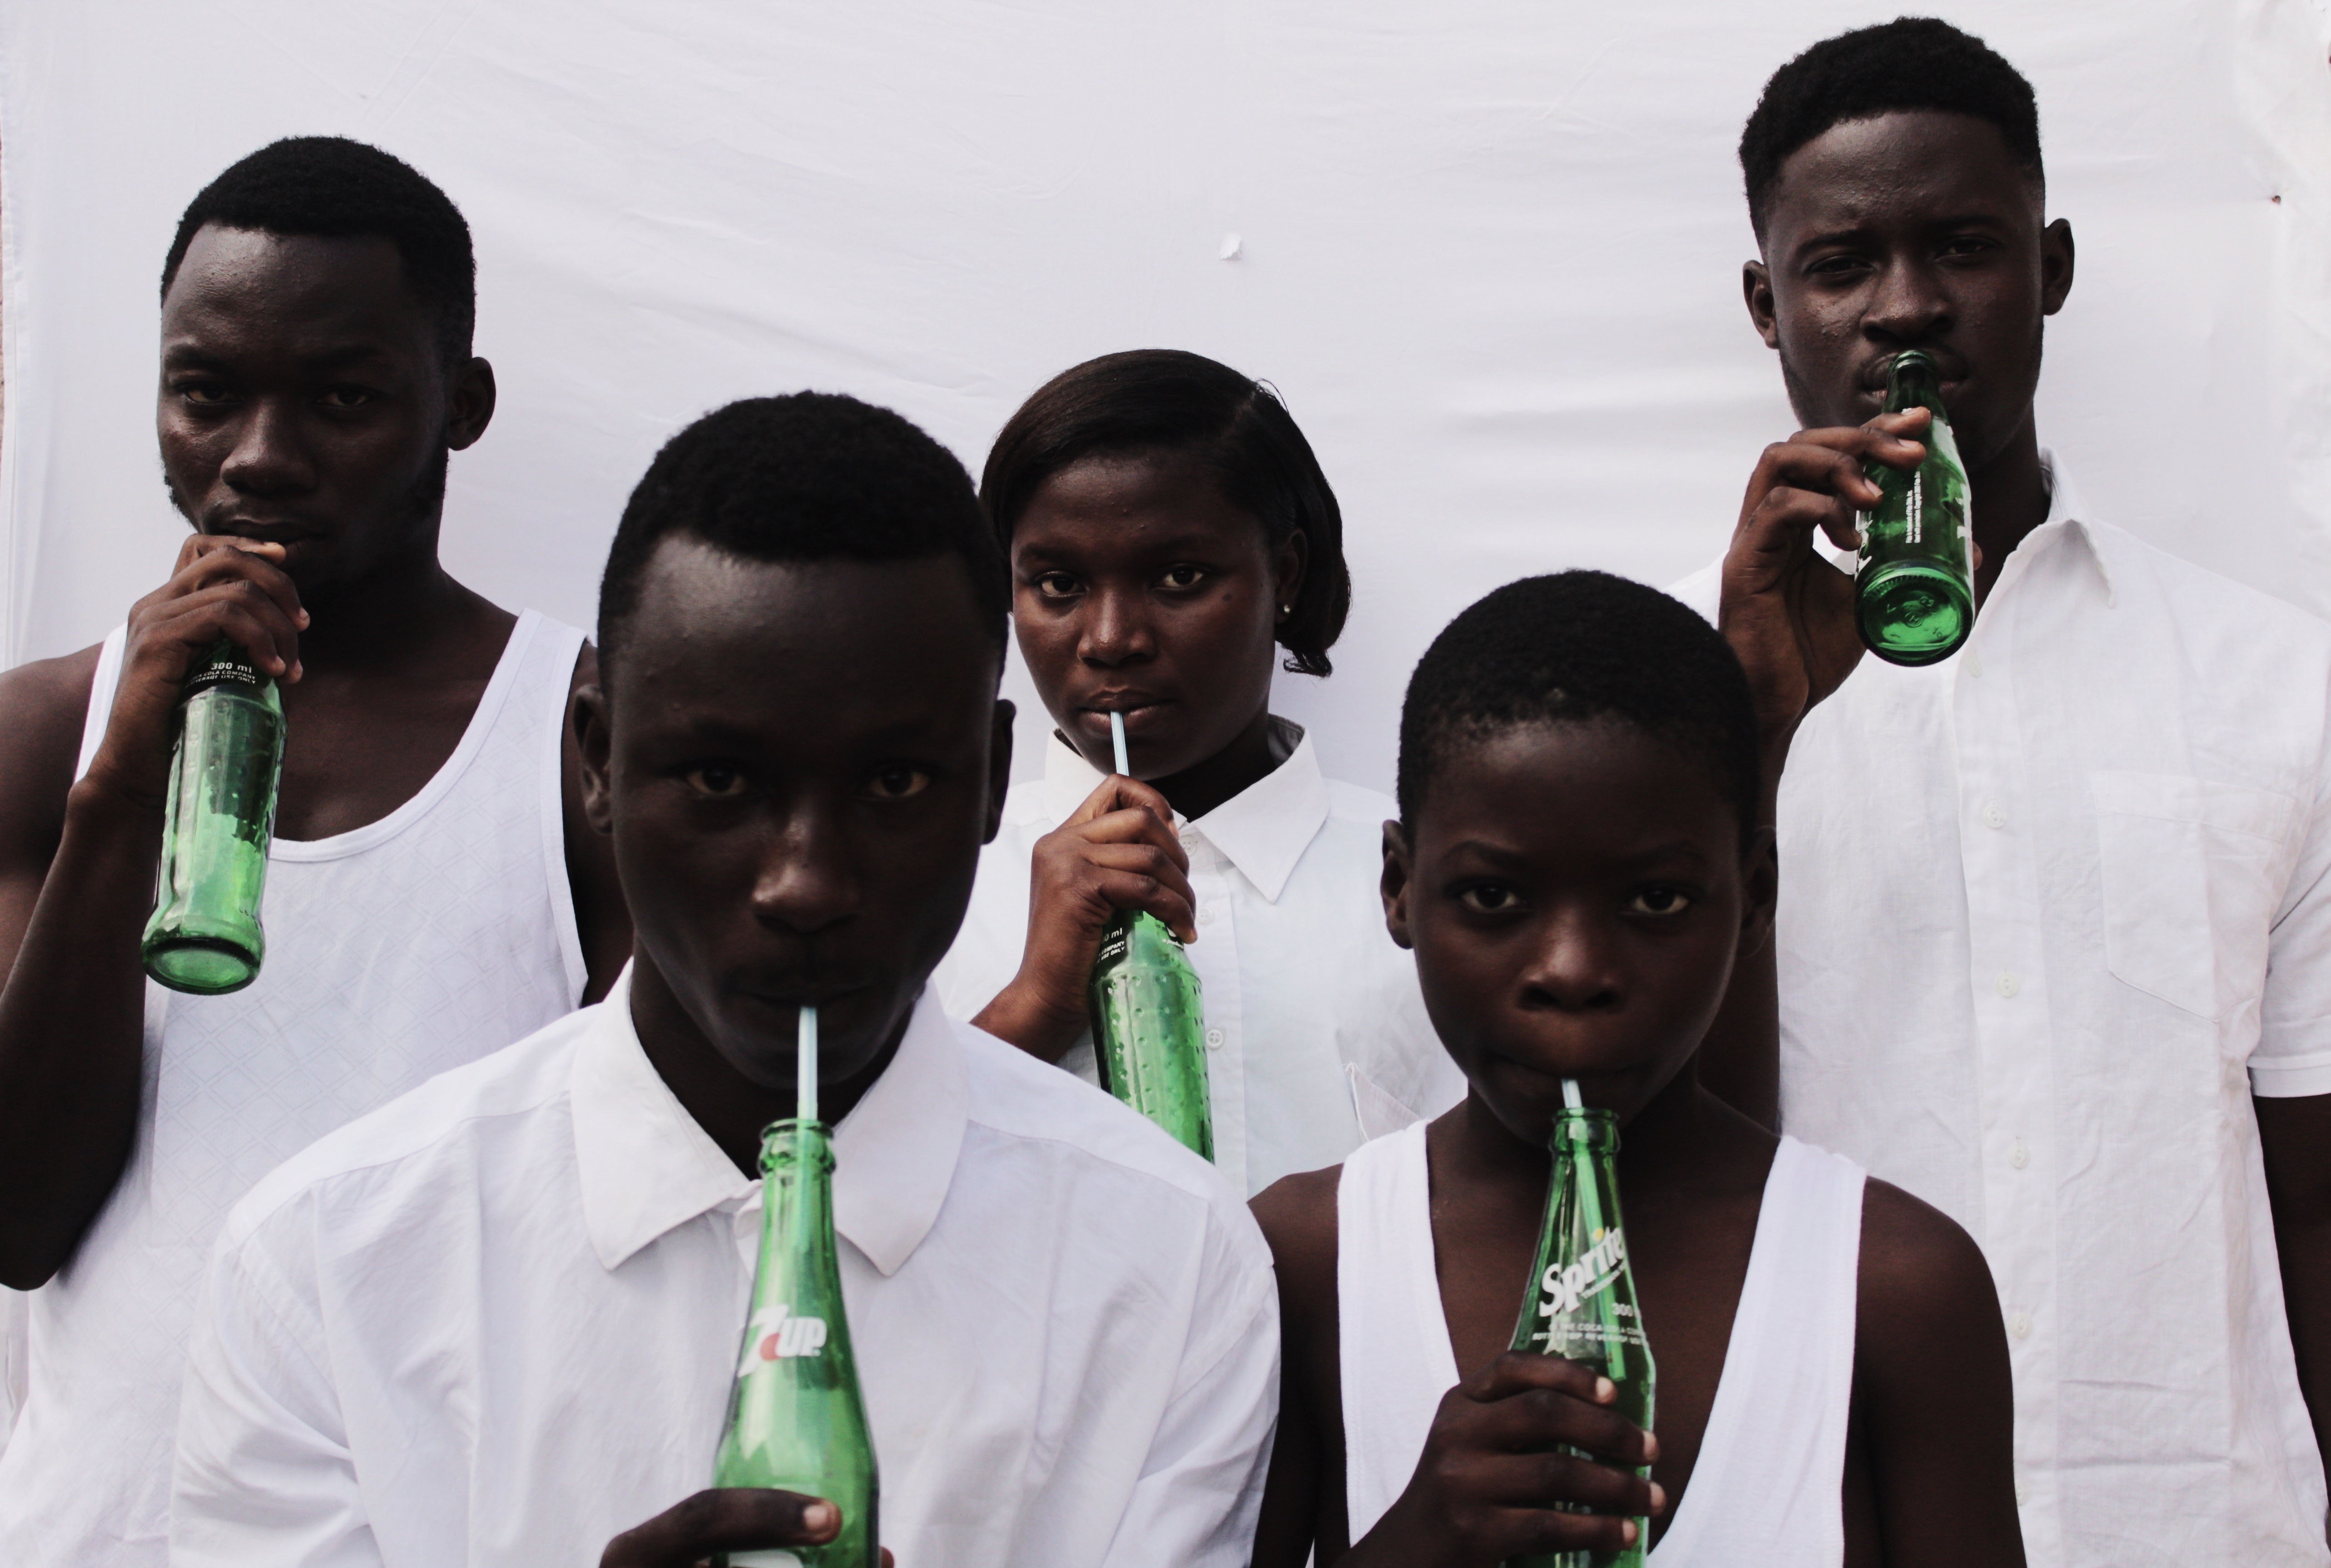 Five young people wearing white shirts and drinking 7up.